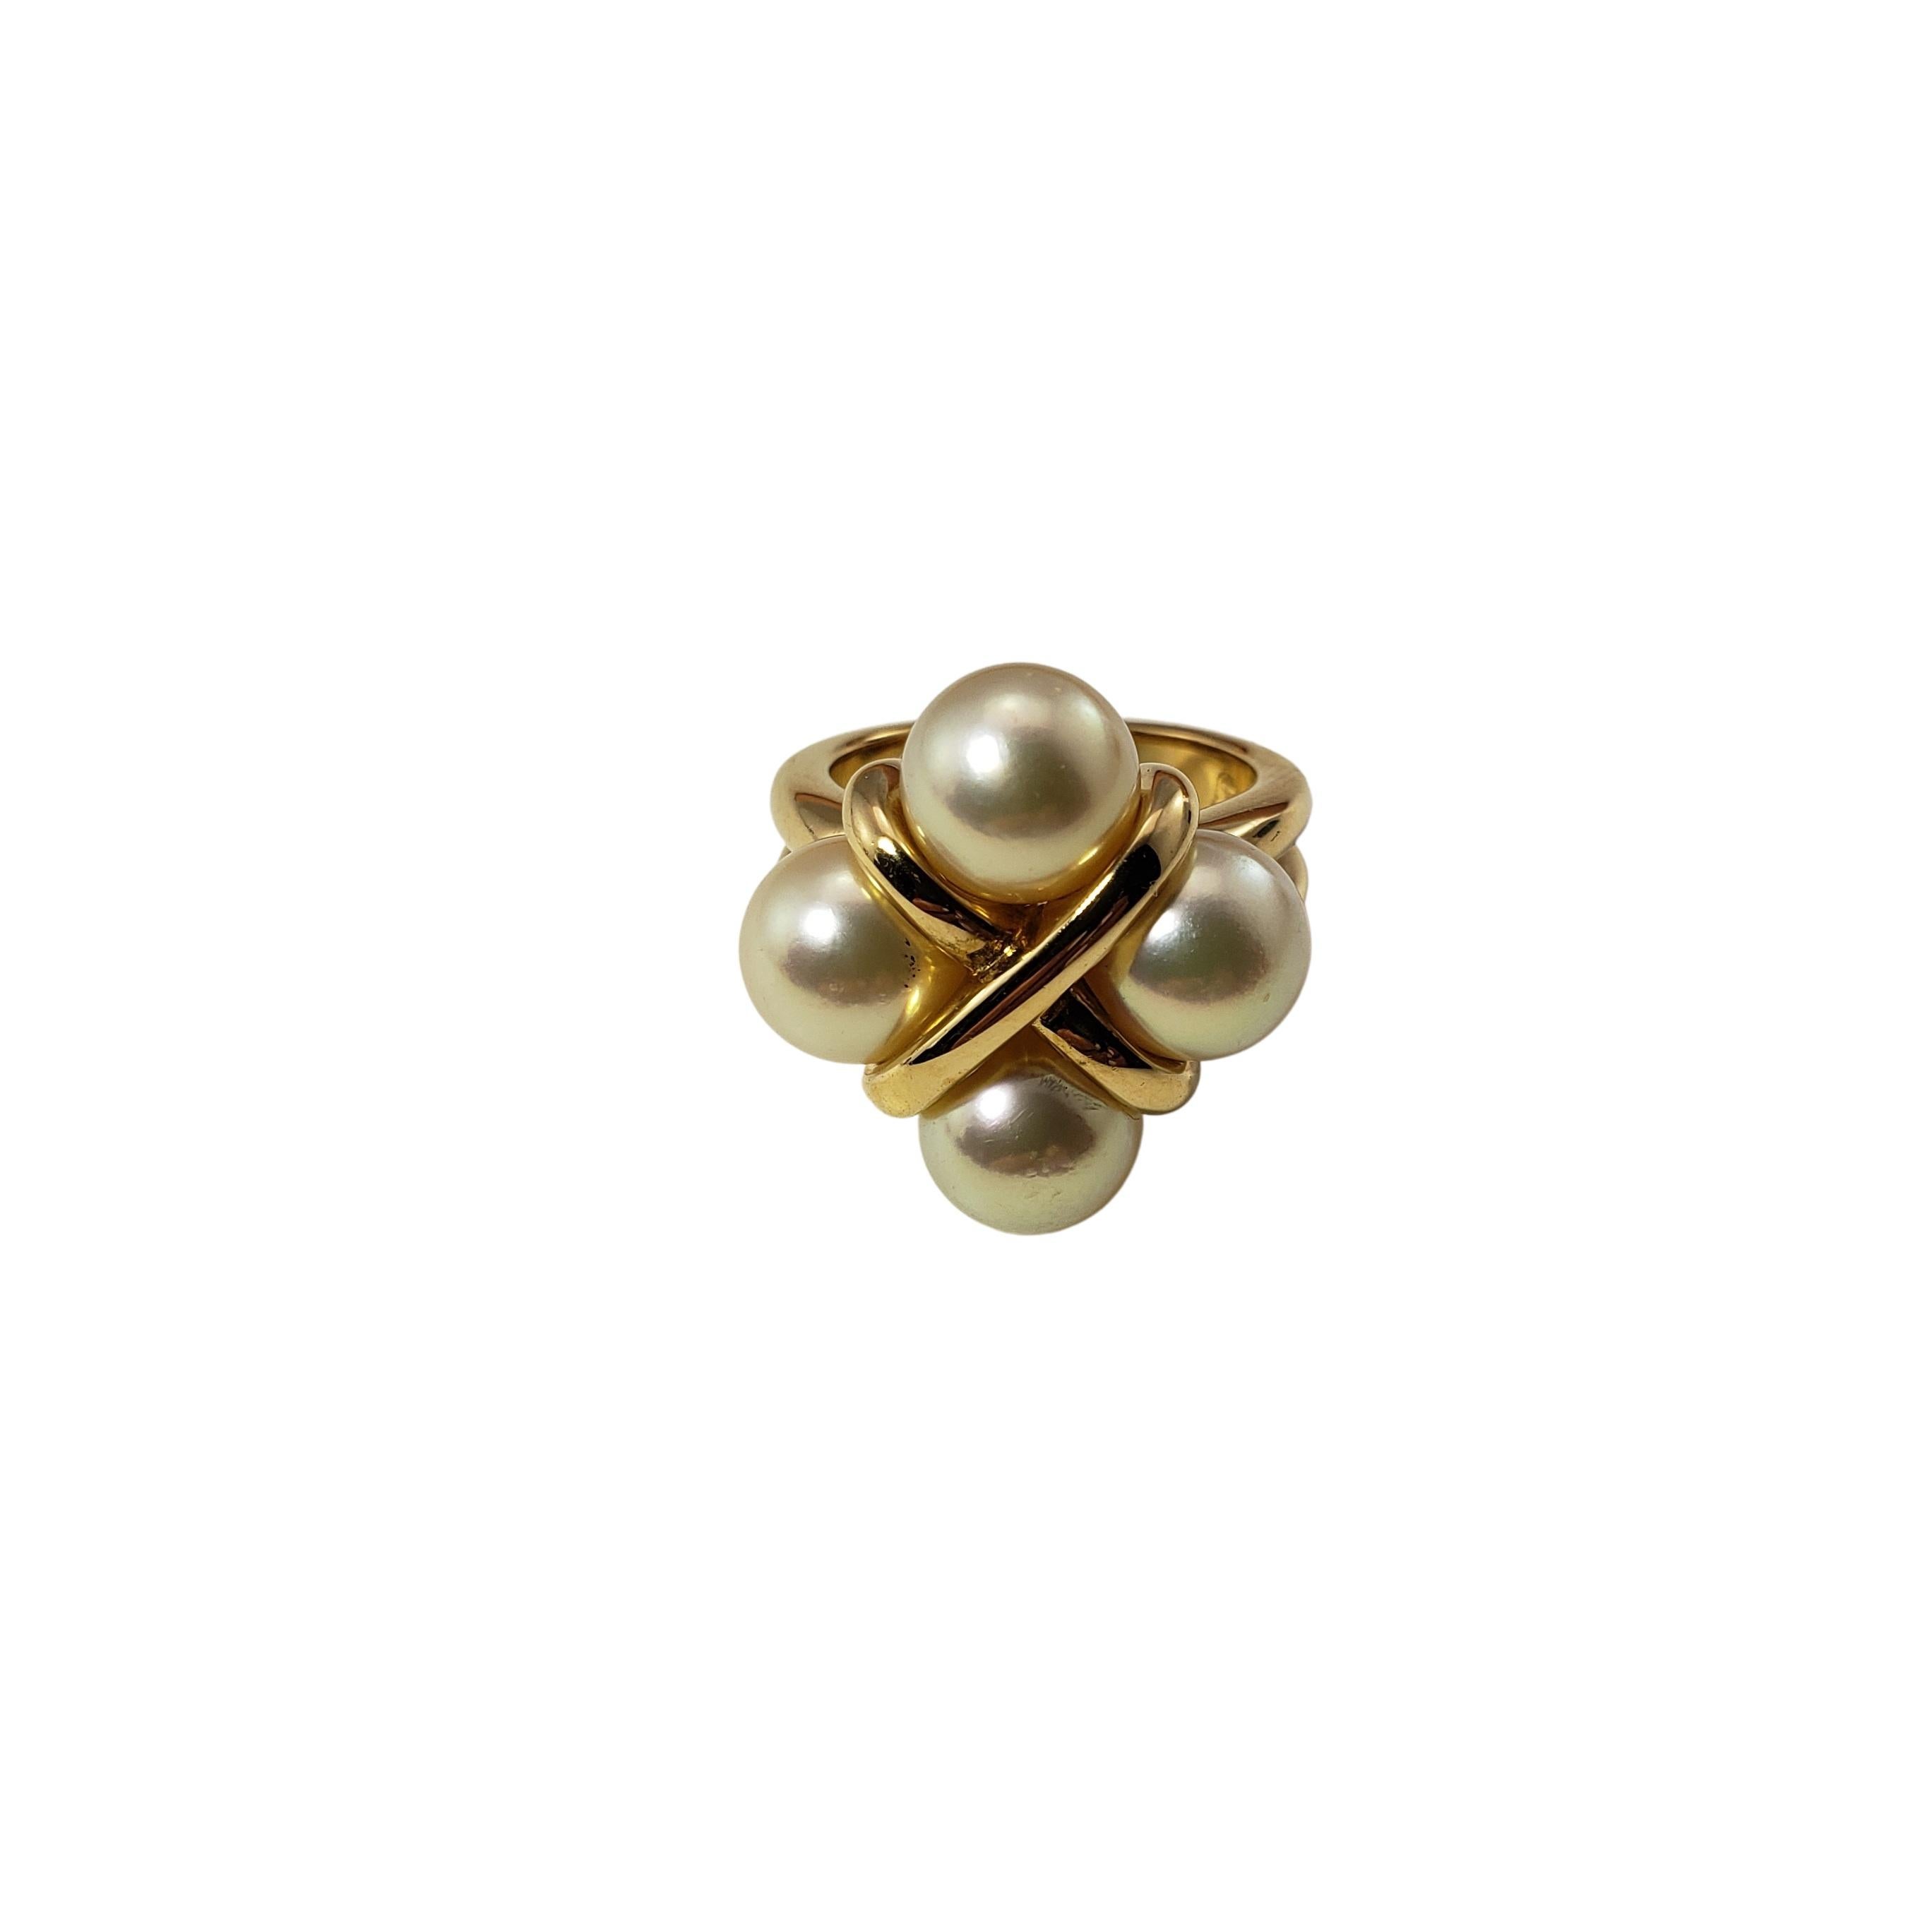 18 Karat Yellow Gold Mikimoto Pearl Ring Size 6-

This stunning ring features four Mikimoto pearls (8 mm) set in beautifully detailed 18K yellow gold.  Width:  21 mm.  Shank:  4 mm.

Ring Size: 6

Weight:  9.3 dwt. /  g14.5 r.

Hallmark:  DCP  750 